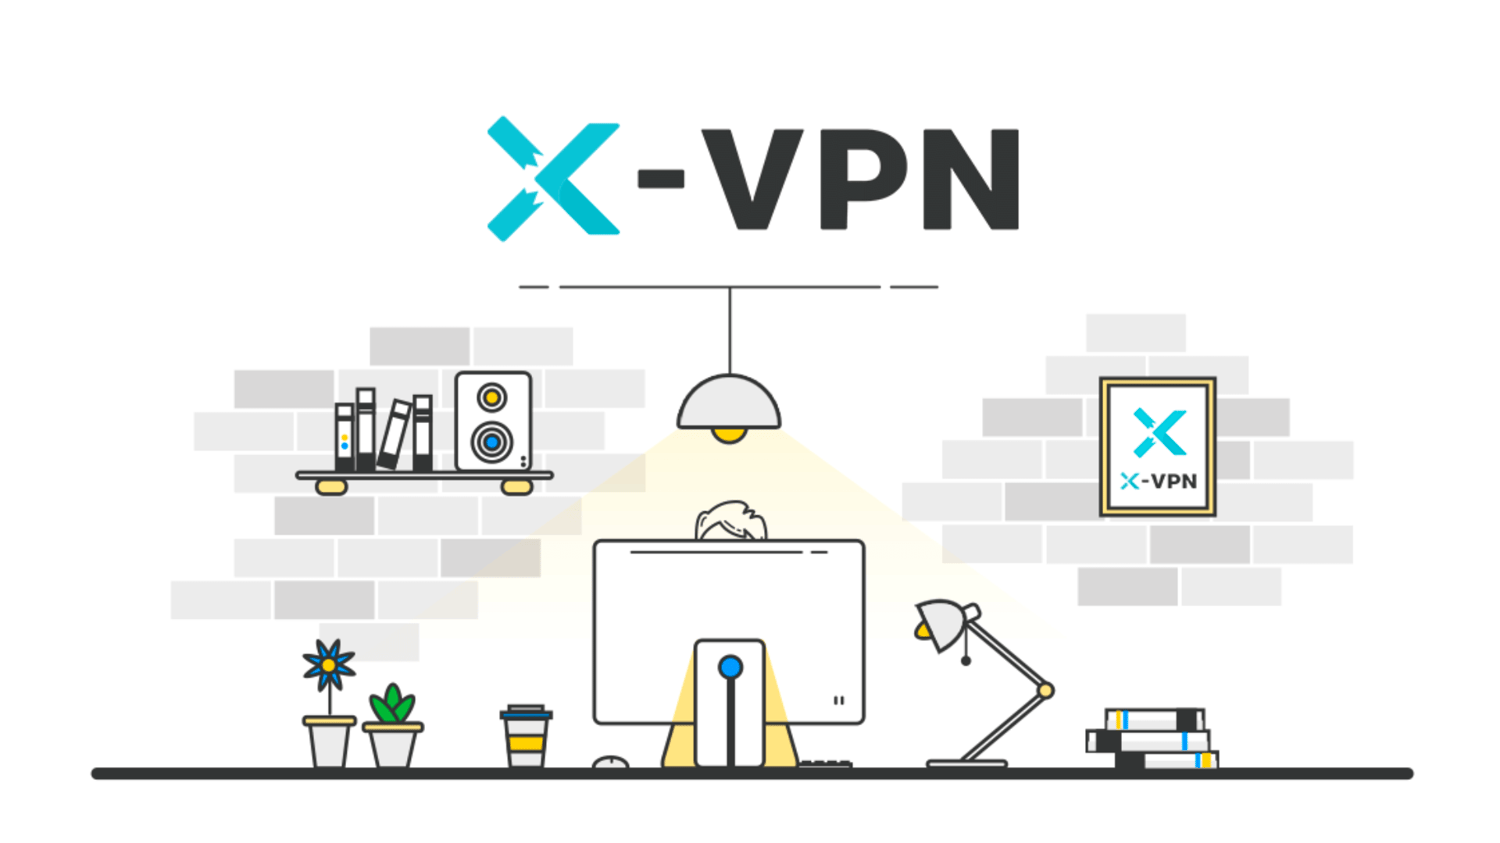 6 benefits of VPN you should know